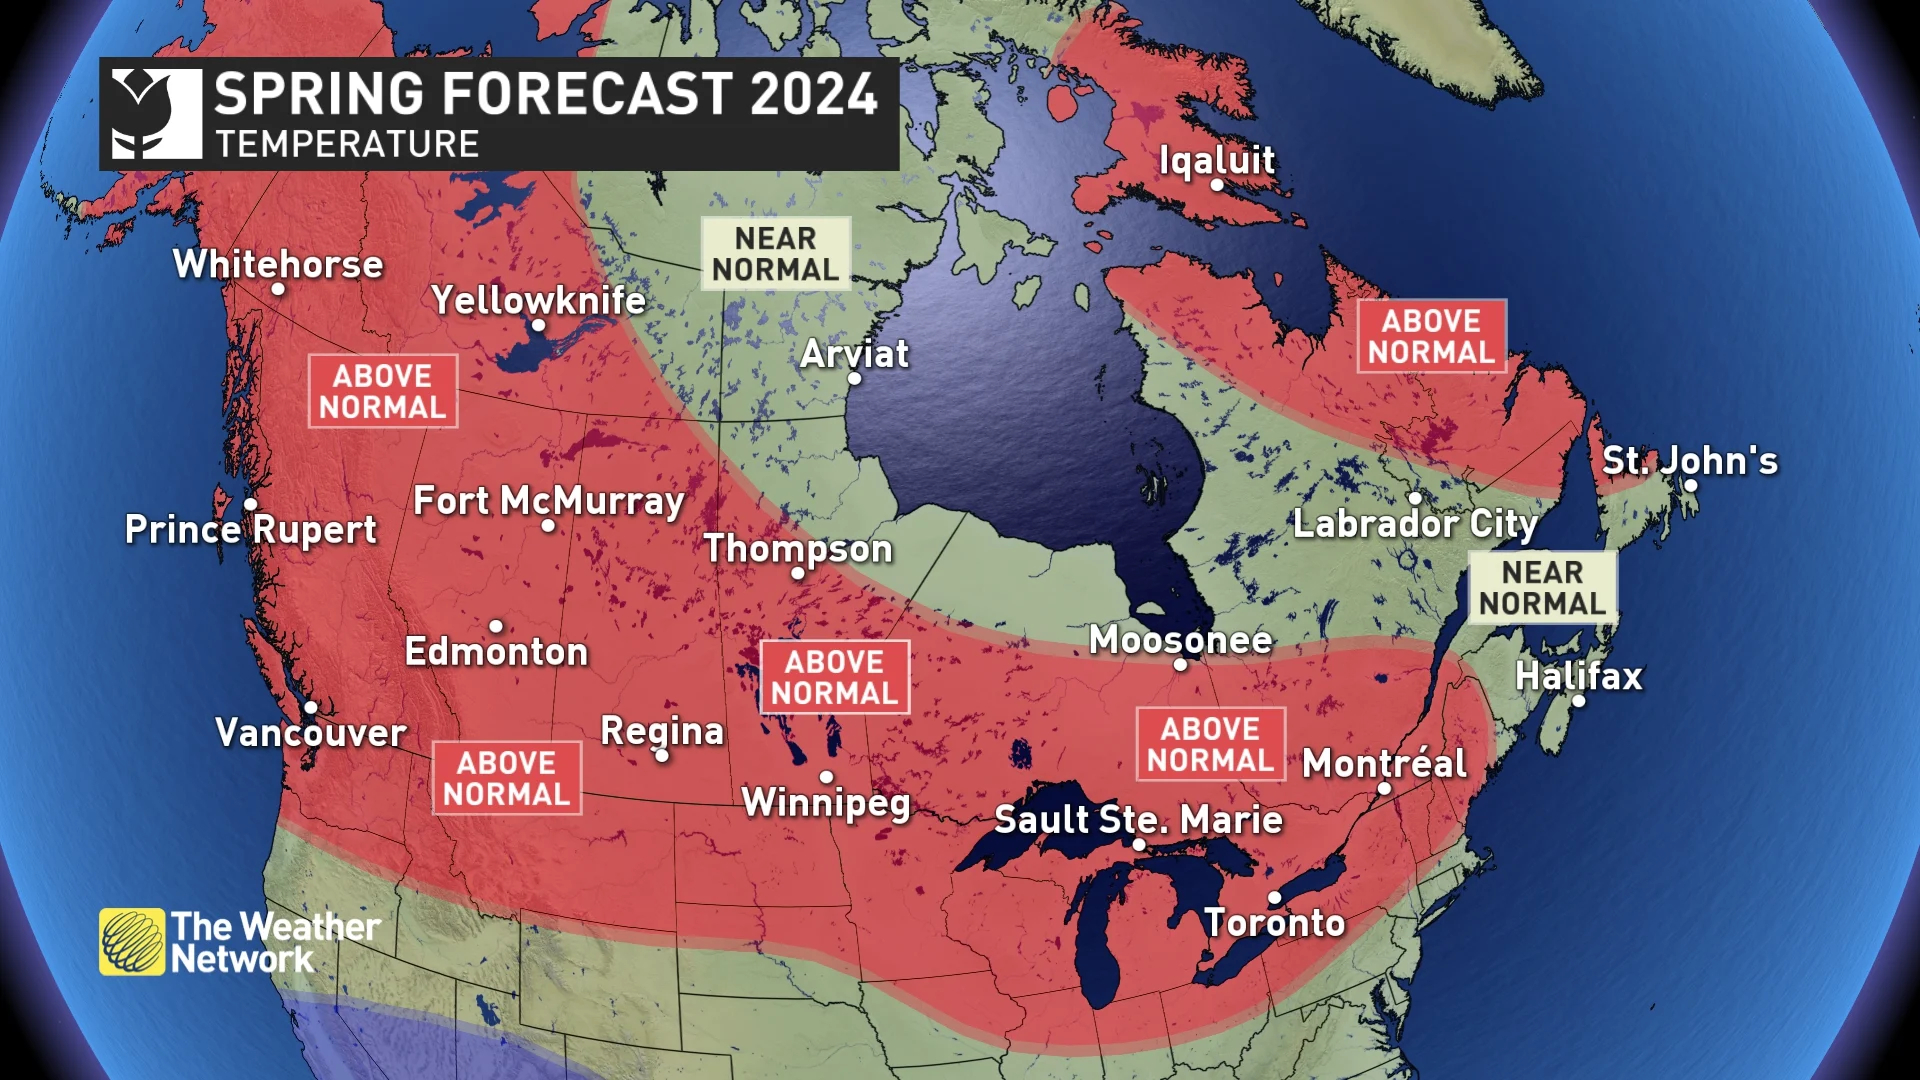 2024 Spring Forecast: National temperature outlook